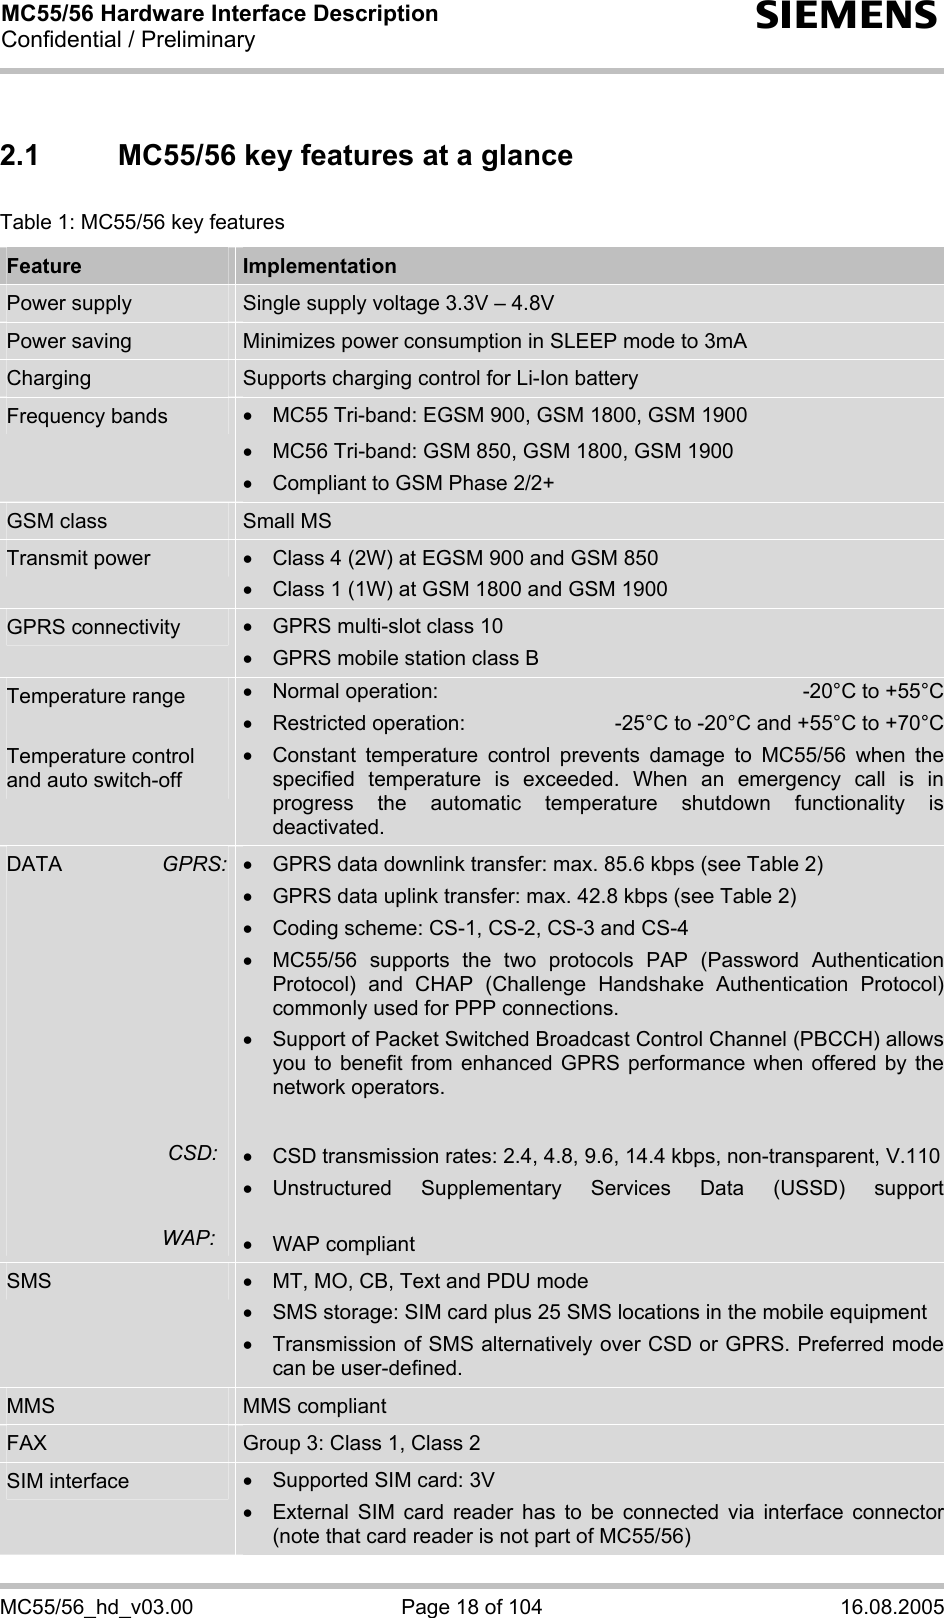 MC55/56 Hardware Interface Description Confidential / Preliminary s MC55/56_hd_v03.00  Page 18 of 104  16.08.2005 2.1  MC55/56 key features at a glance Table 1: MC55/56 key features  Feature  Implementation Power supply  Single supply voltage 3.3V – 4.8V  Power saving  Minimizes power consumption in SLEEP mode to 3mA Charging  Supports charging control for Li-Ion battery Frequency bands  •  MC55 Tri-band: EGSM 900, GSM 1800, GSM 1900 •  MC56 Tri-band: GSM 850, GSM 1800, GSM 1900 •  Compliant to GSM Phase 2/2+ GSM class  Small MS Transmit power  •  Class 4 (2W) at EGSM 900 and GSM 850 •  Class 1 (1W) at GSM 1800 and GSM 1900 GPRS connectivity  •  GPRS multi-slot class 10 •  GPRS mobile station class B Temperature range   Temperature control and auto switch-off •  Normal operation:   -20°C to +55°C •  Restricted operation:   -25°C to -20°C and +55°C to +70°C•  Constant temperature control prevents damage to MC55/56 when the specified temperature is exceeded. When an emergency call is in progress the automatic temperature shutdown functionality is deactivated. DATA  GPRS:            CSD:    WAP: •  GPRS data downlink transfer: max. 85.6 kbps (see Table 2) •  GPRS data uplink transfer: max. 42.8 kbps (see Table 2) •  Coding scheme: CS-1, CS-2, CS-3 and CS-4 •  MC55/56 supports the two protocols PAP (Password Authentication Protocol) and CHAP (Challenge Handshake Authentication Protocol) commonly used for PPP connections. •  Support of Packet Switched Broadcast Control Channel (PBCCH) allows you to benefit from enhanced GPRS performance when offered by the network operators.   •  CSD transmission rates: 2.4, 4.8, 9.6, 14.4 kbps, non-transparent, V.110• Unstructured Supplementary Services Data (USSD) support  • WAP compliant SMS  •  MT, MO, CB, Text and PDU mode •  SMS storage: SIM card plus 25 SMS locations in the mobile equipment •  Transmission of SMS alternatively over CSD or GPRS. Preferred mode can be user-defined. MMS  MMS compliant FAX  Group 3: Class 1, Class 2 SIM interface •  Supported SIM card: 3V •  External SIM card reader has to be connected via interface connector (note that card reader is not part of MC55/56) 